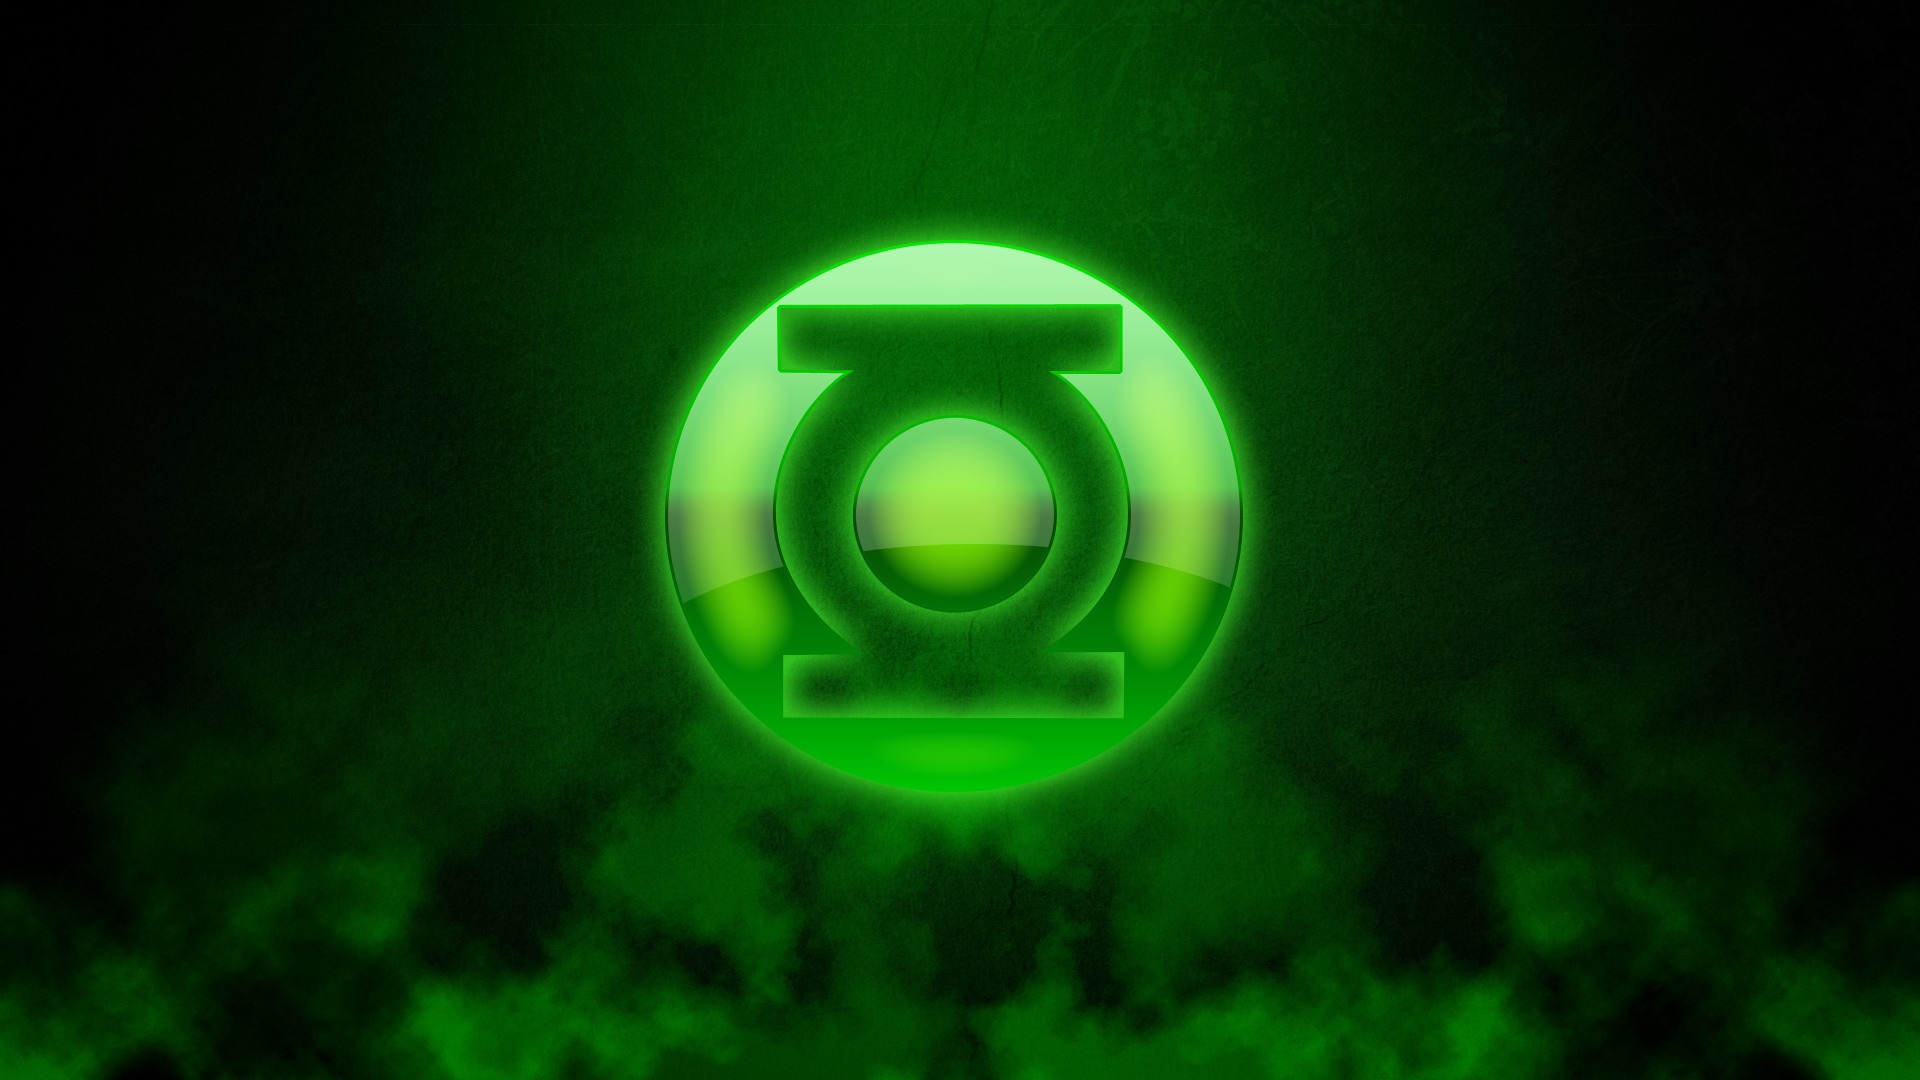 Green Lantern logo Cool Backgrounds Wallpapers 179 - HD Wallpapers ...